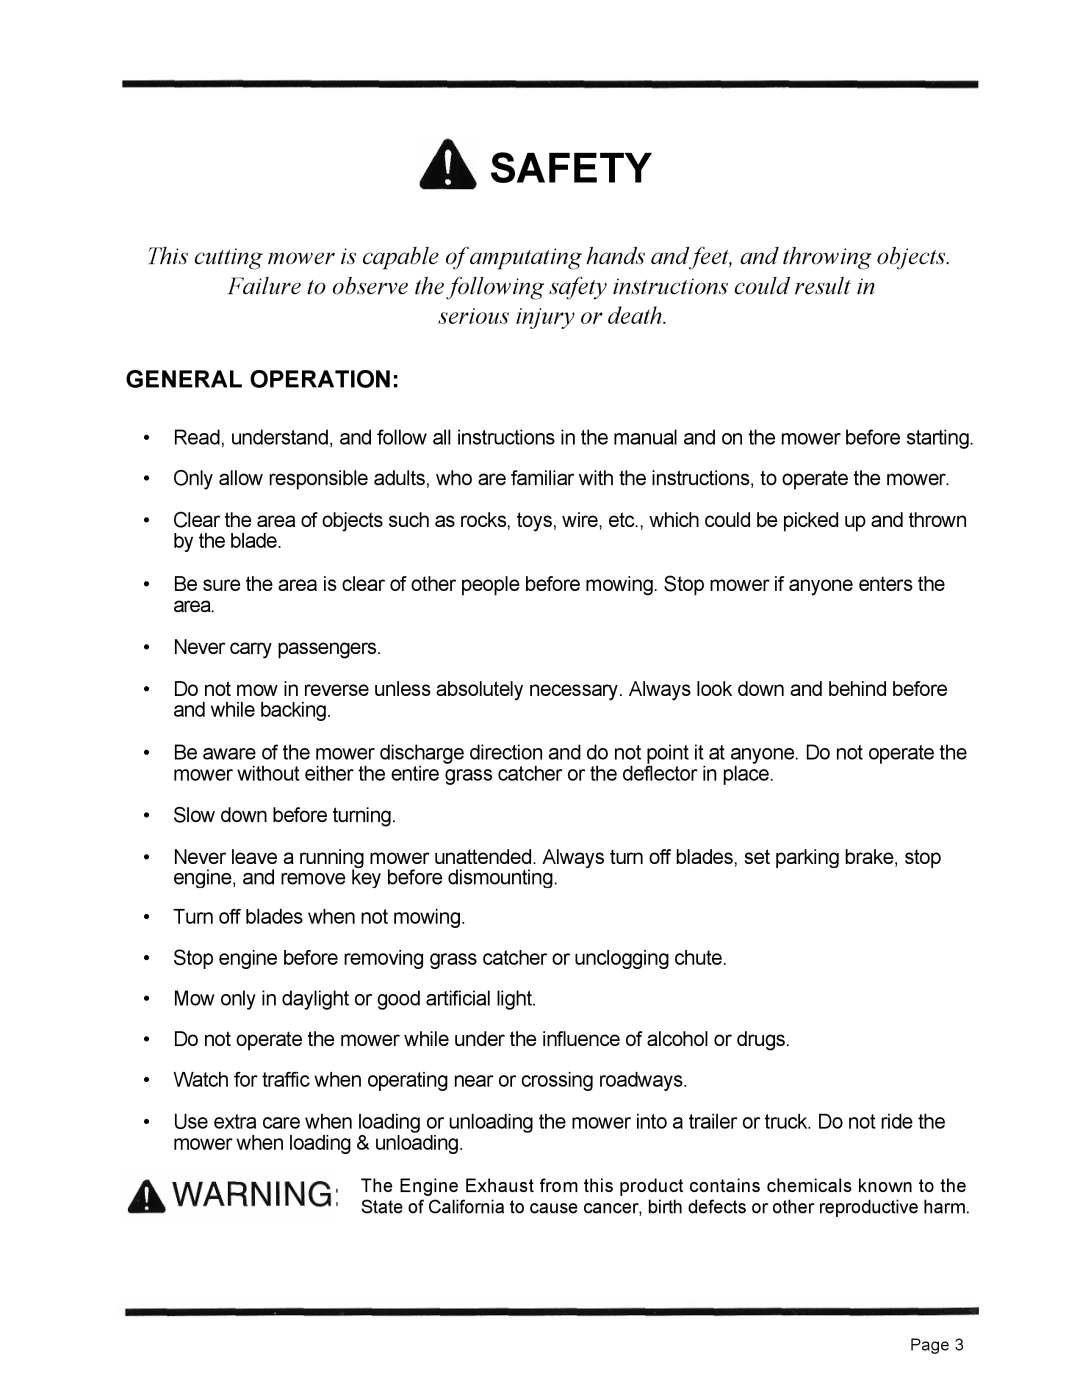 Dixon 6601 Series manual Safety, serious injury or death, General Operation 